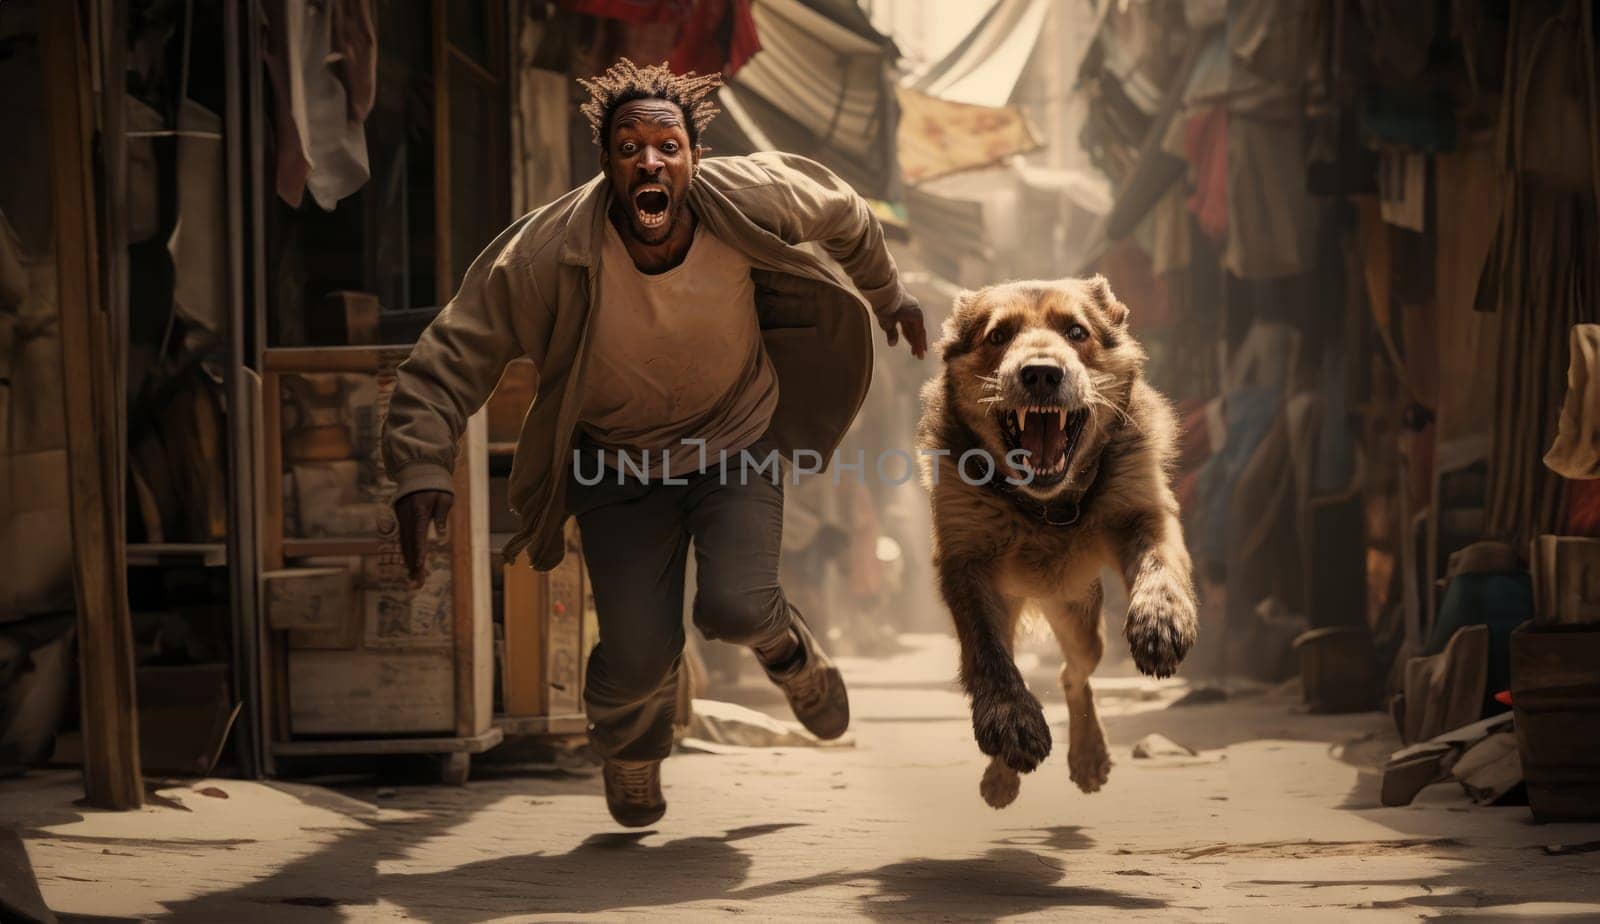 A man and his dog are captured in a dynamic mid-stride, their expressions reflecting the exhilaration of running together.